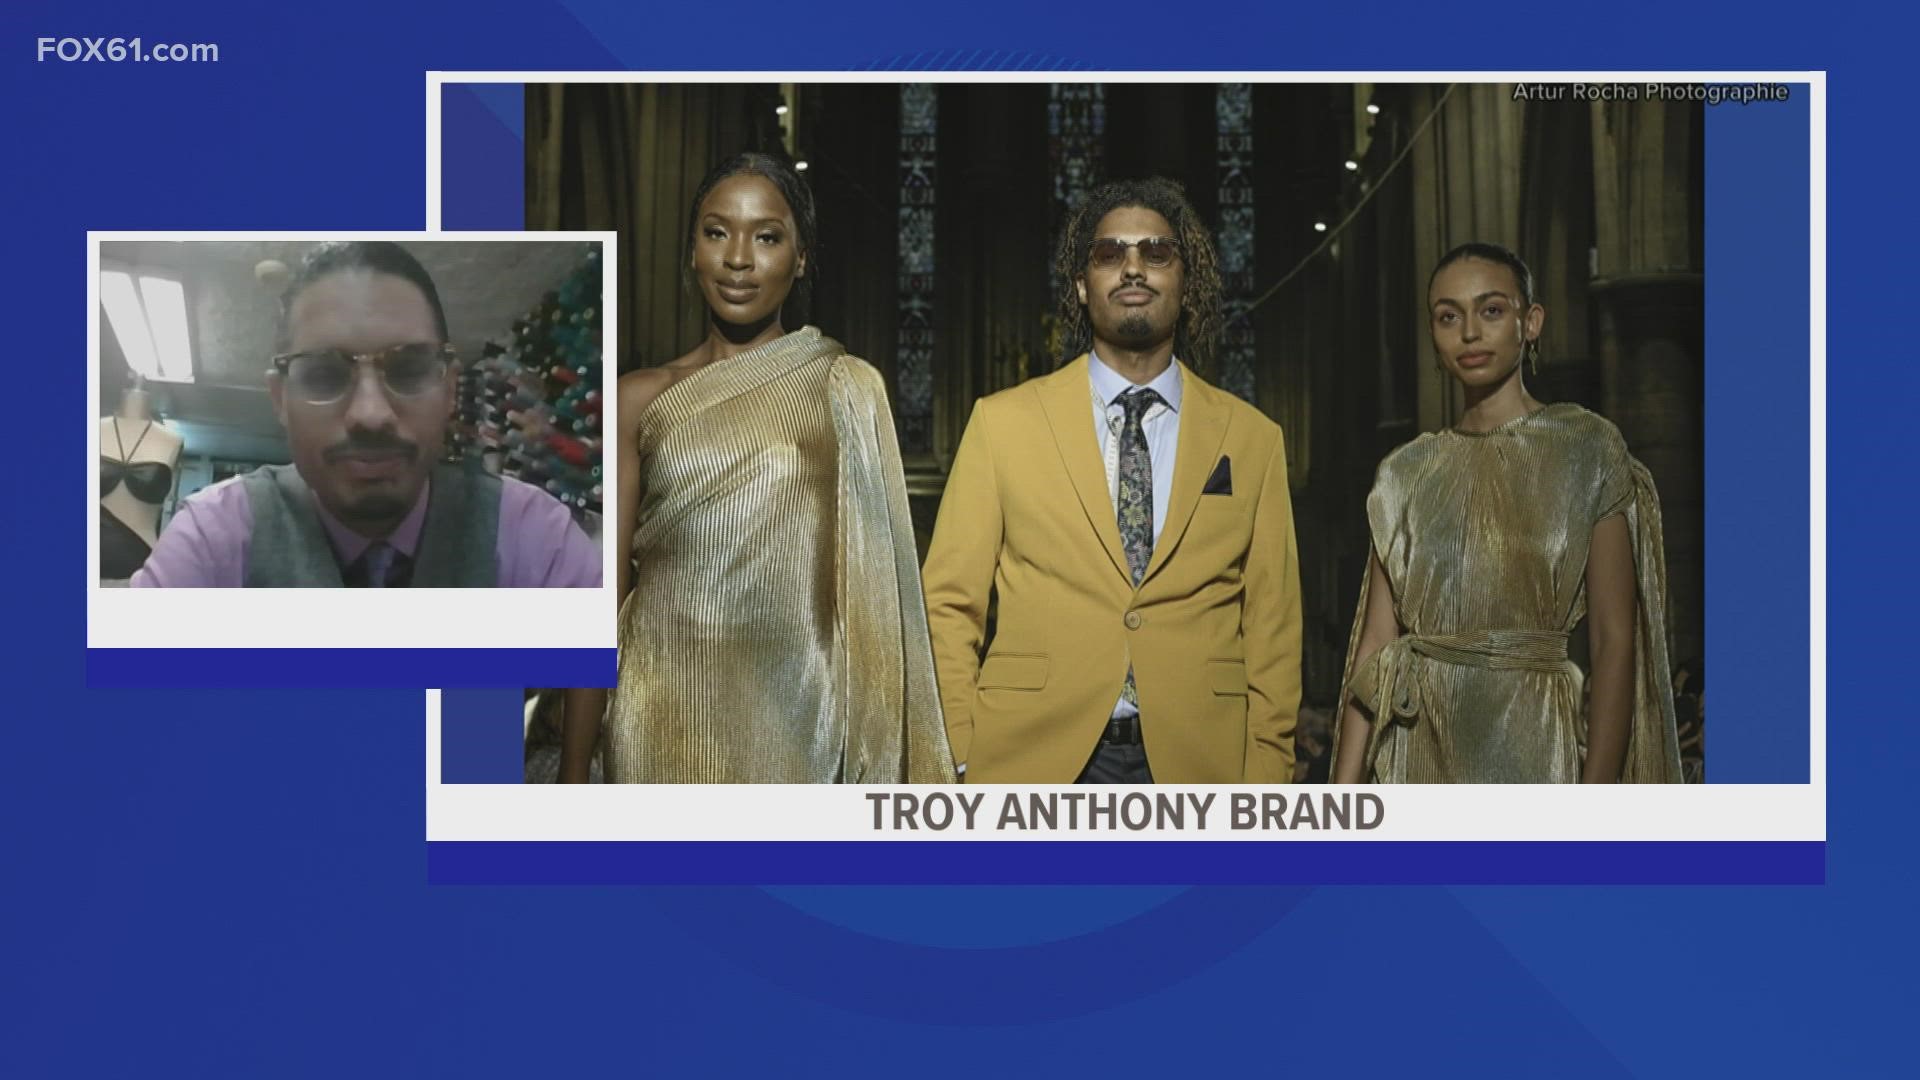 Troy Anthony specializes in wearable couture and in the coming weeks will be featured in New York and Paris fashion week.